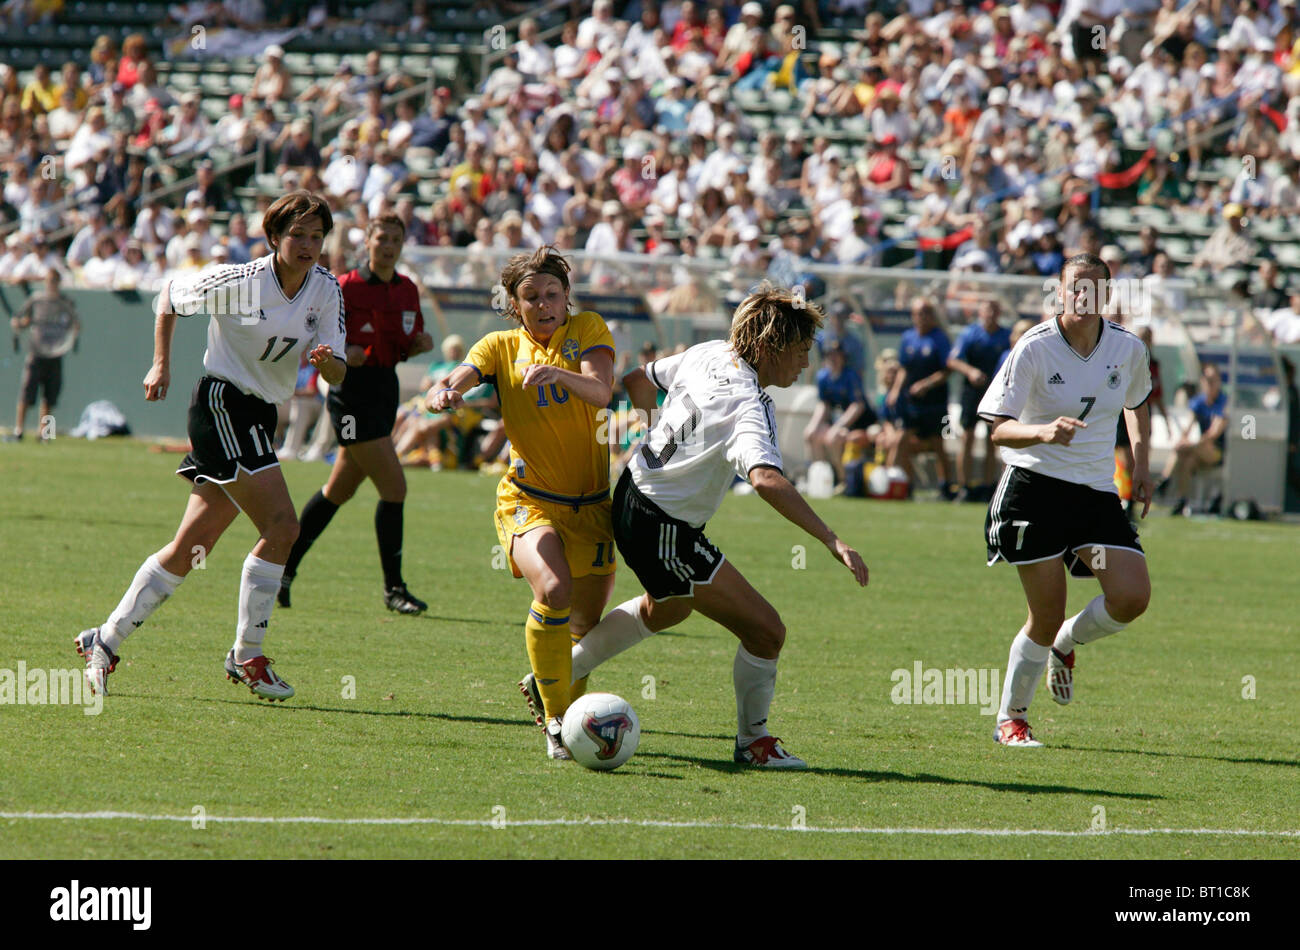 Hanna Ljungberg of Sweden (10) drives past Sandra Minnert of Germany (13) during the 2003 Women's World Cup soccer final. Stock Photo